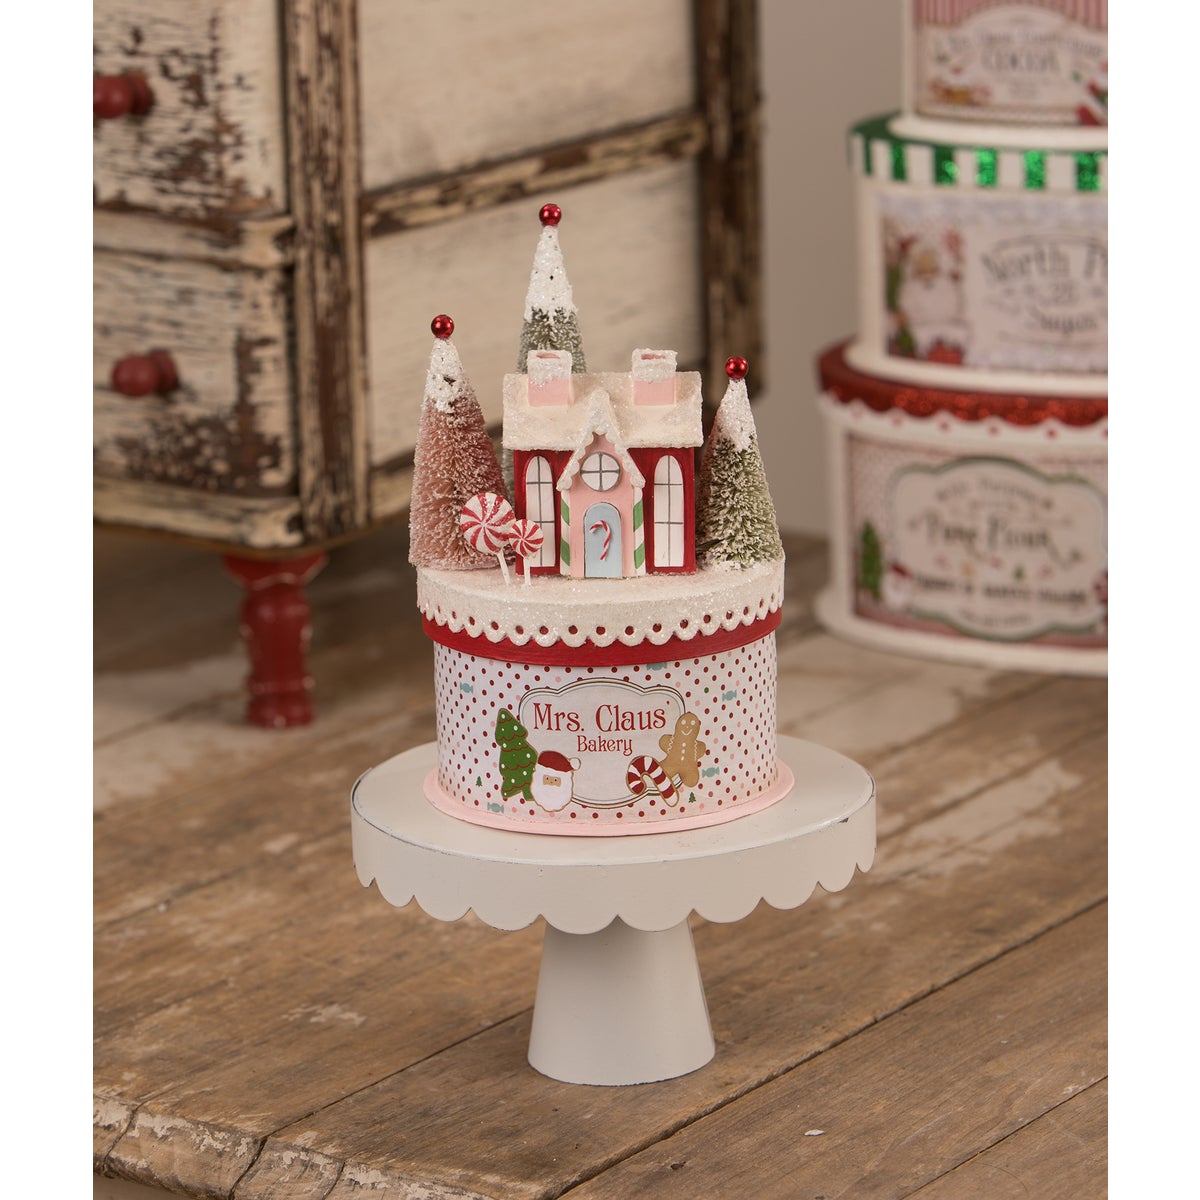 Mrs. Claus' Bakery on Box